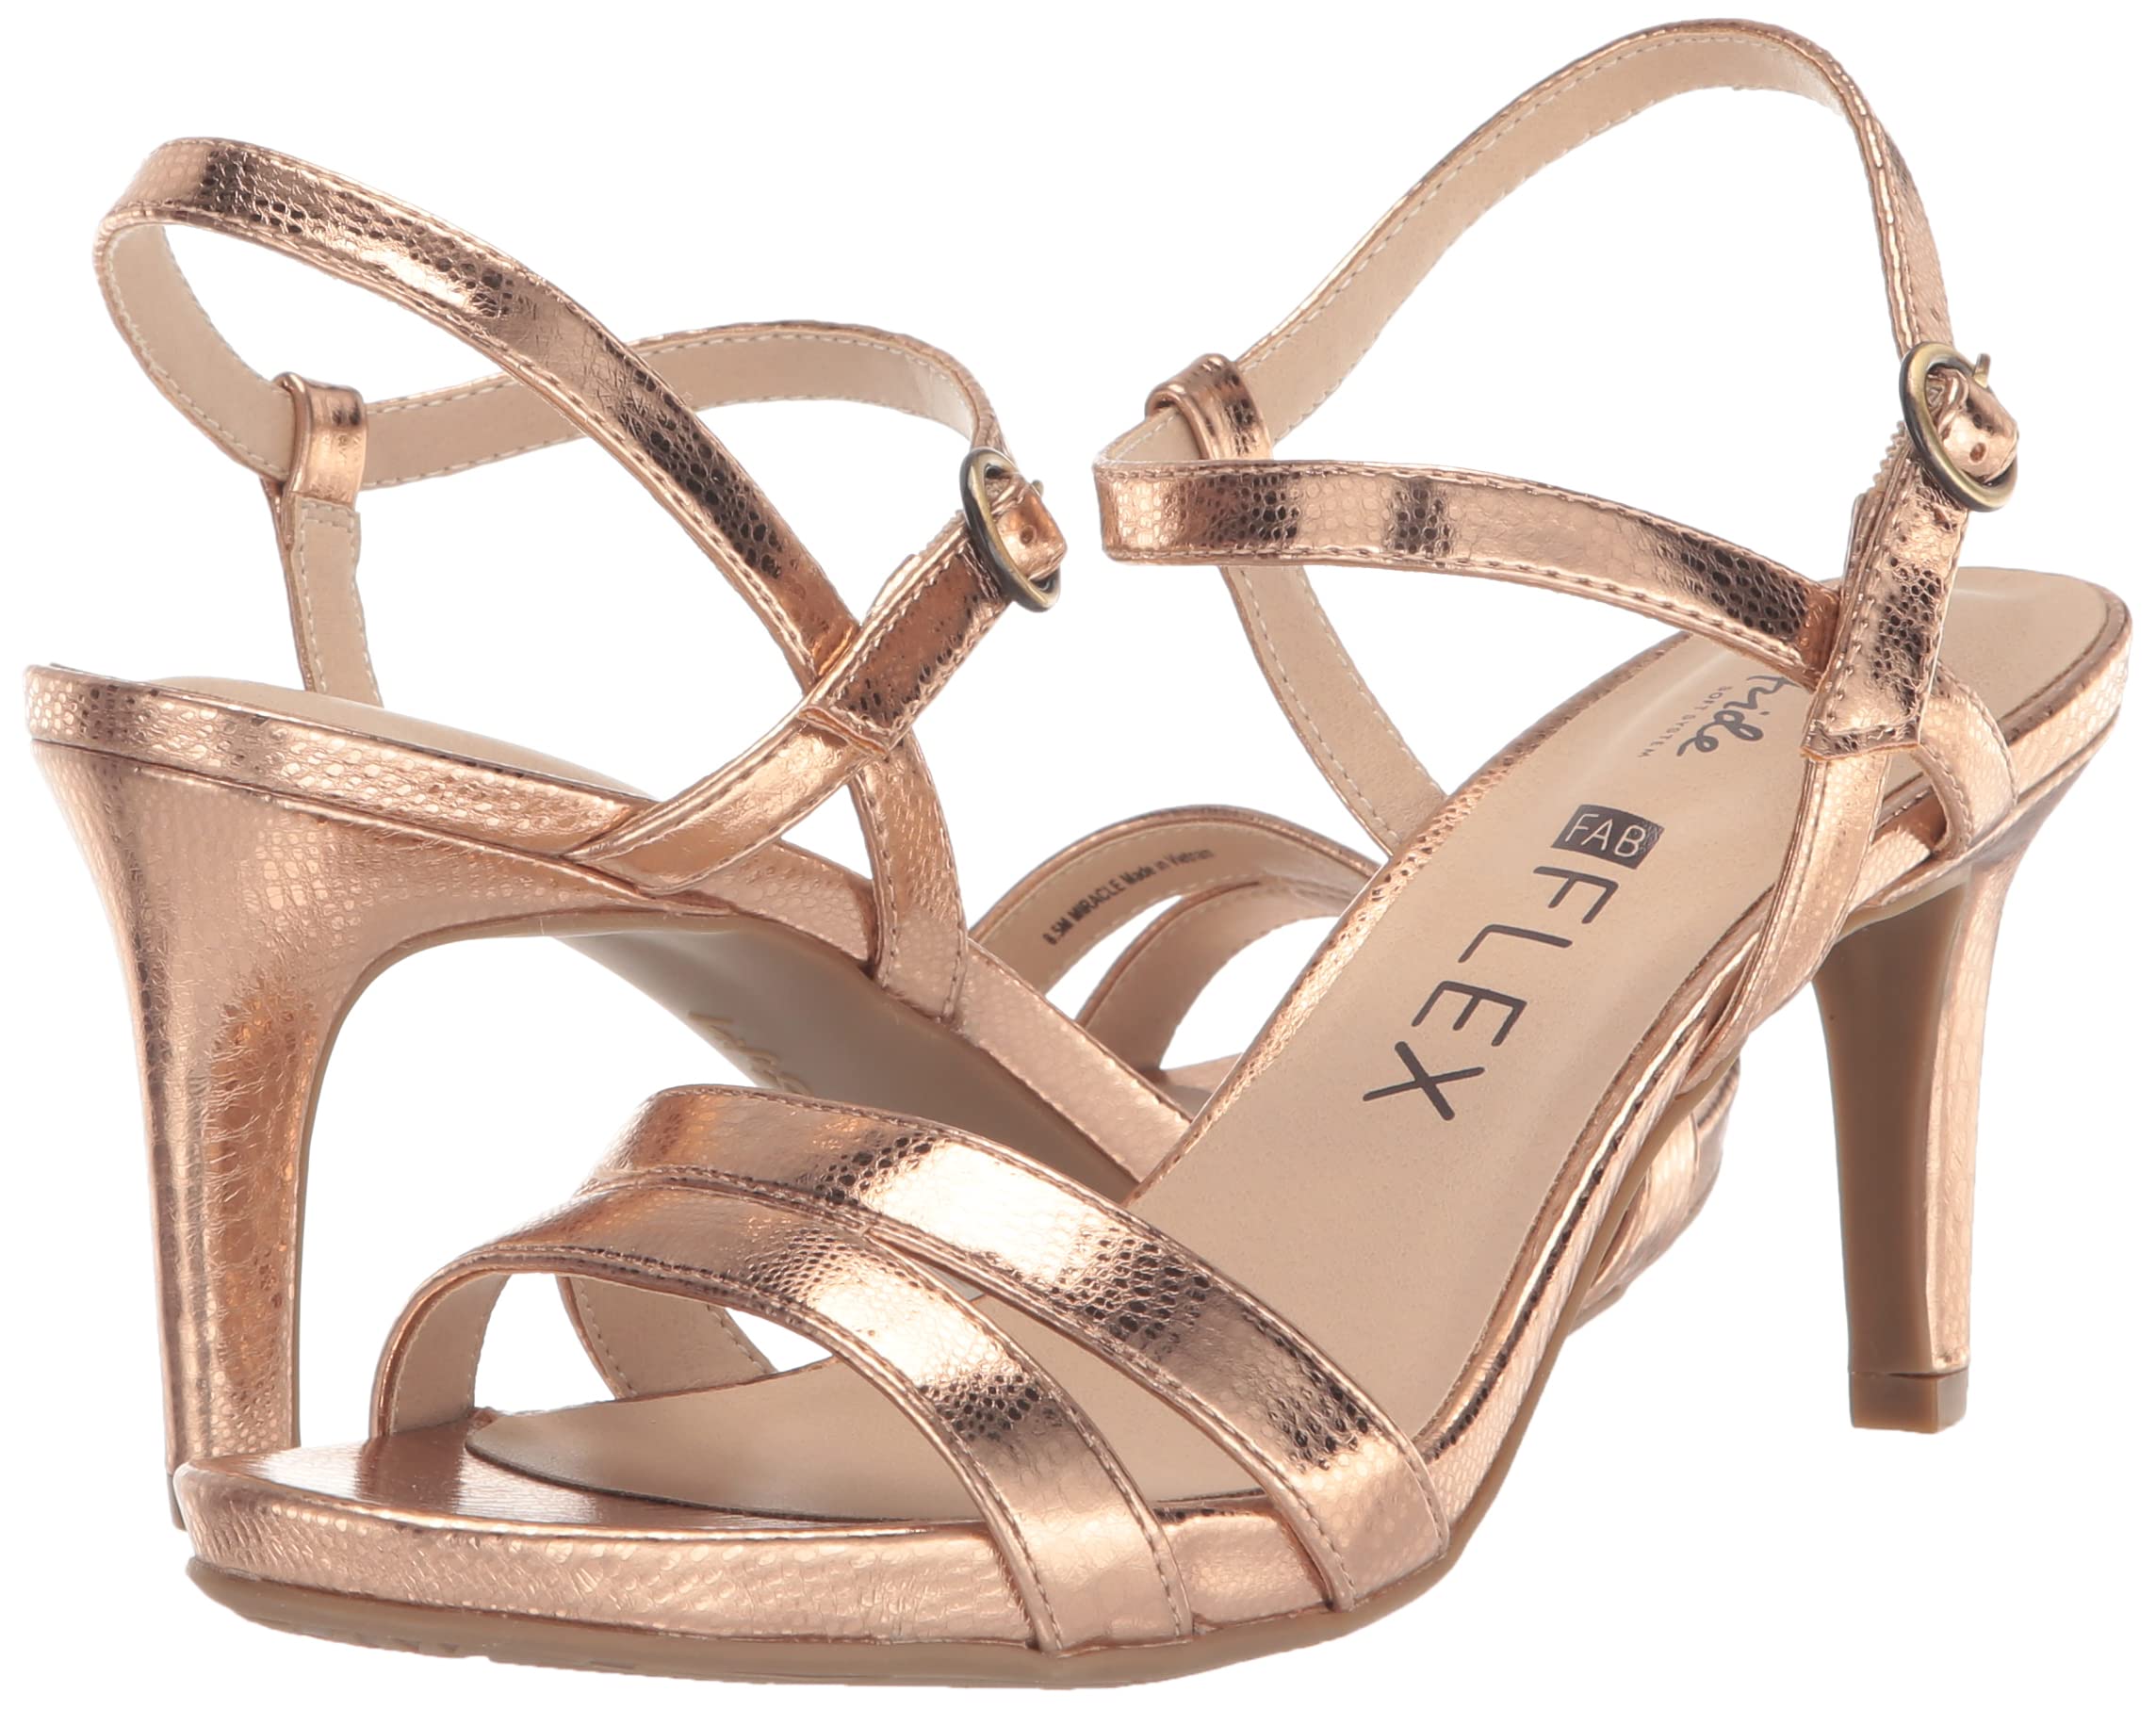 LifeStride Women's Miracle Strappy Heeled Sandal